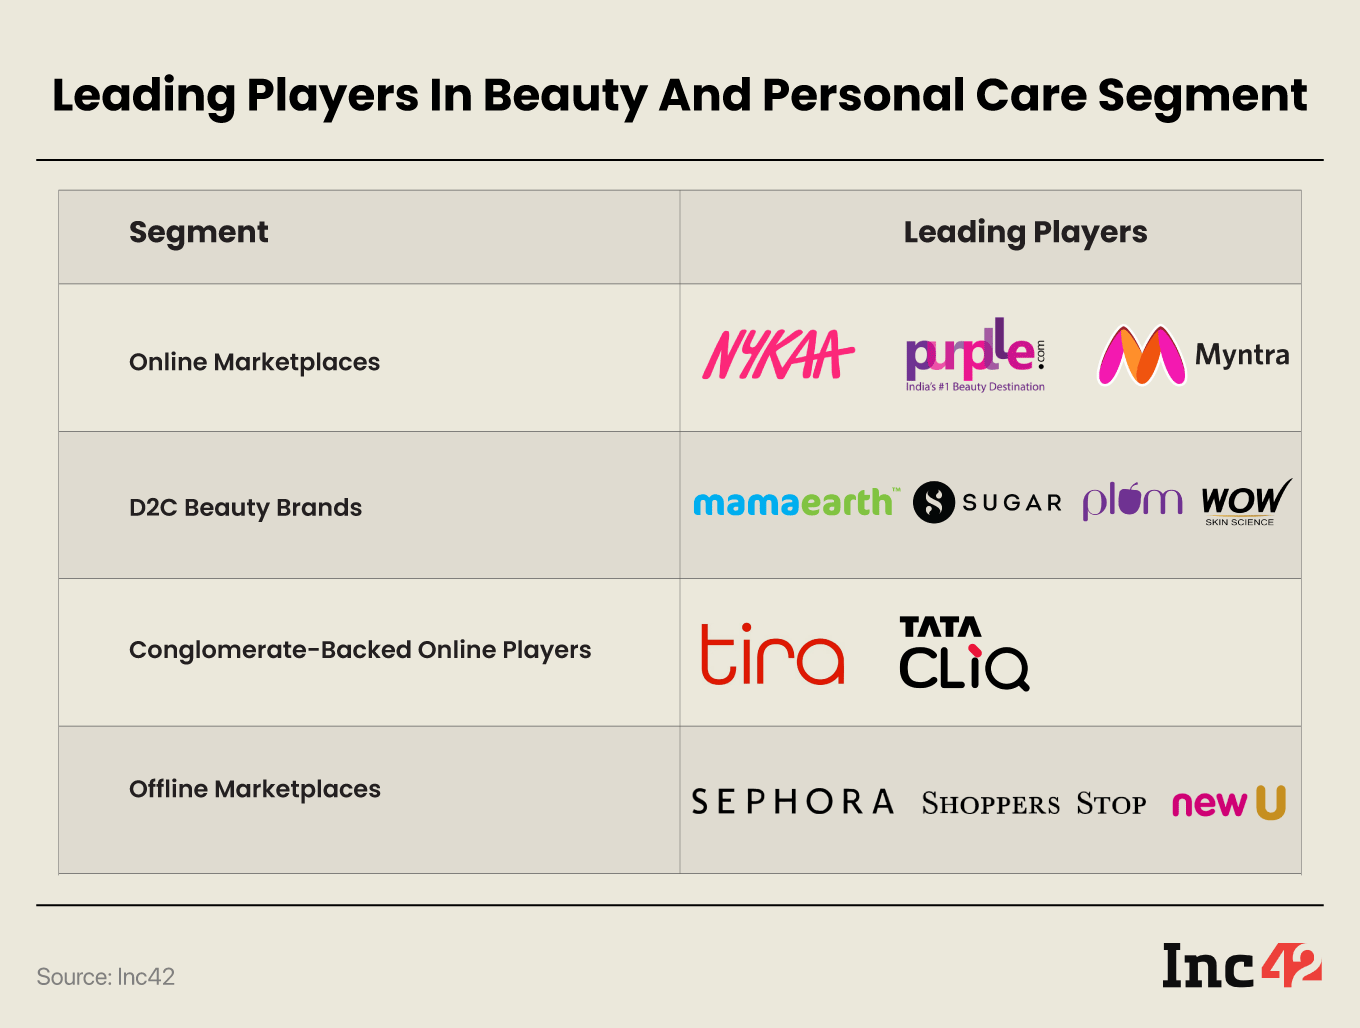 Beauty Product players